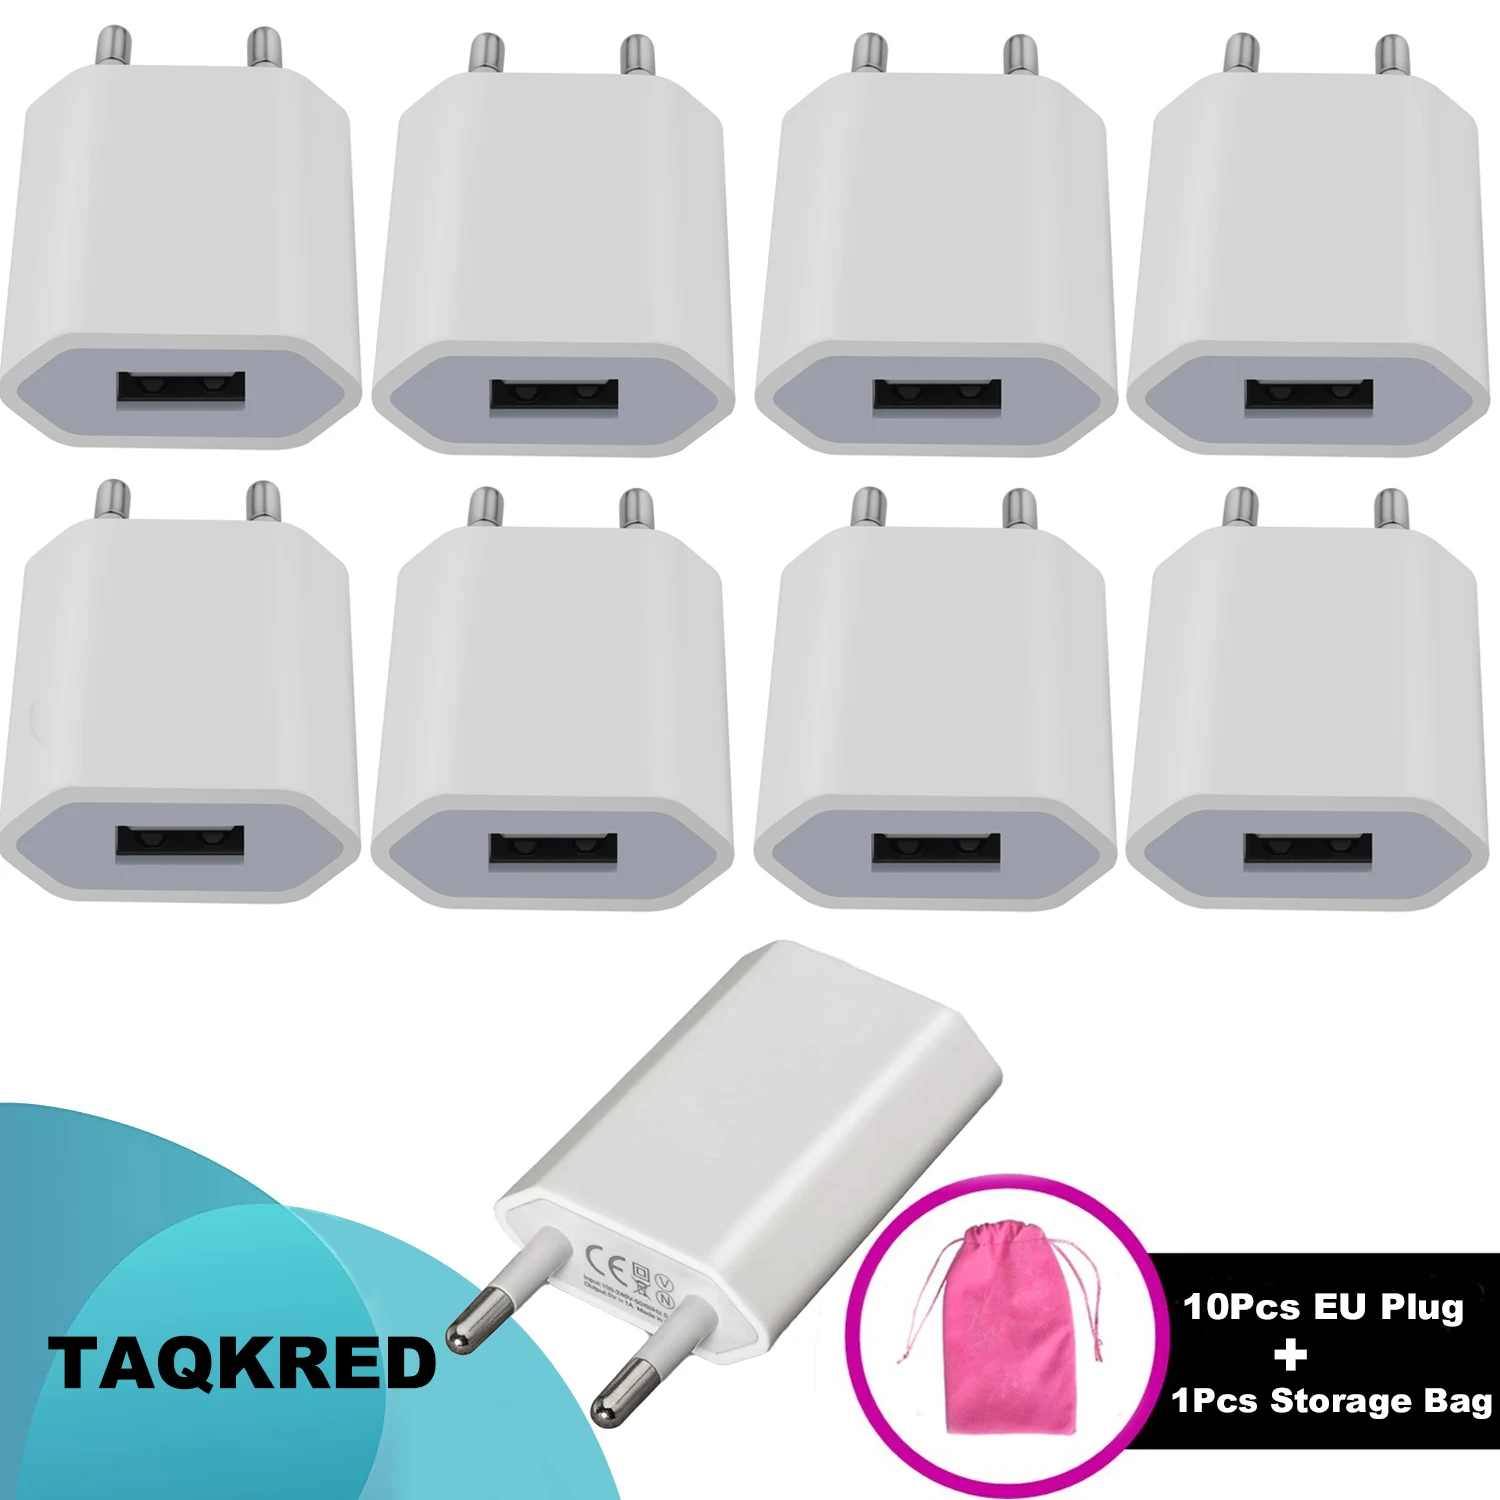 Genuine For Apple iPhone Charger Original 5w Wall USB Power Adapter Cube Lot